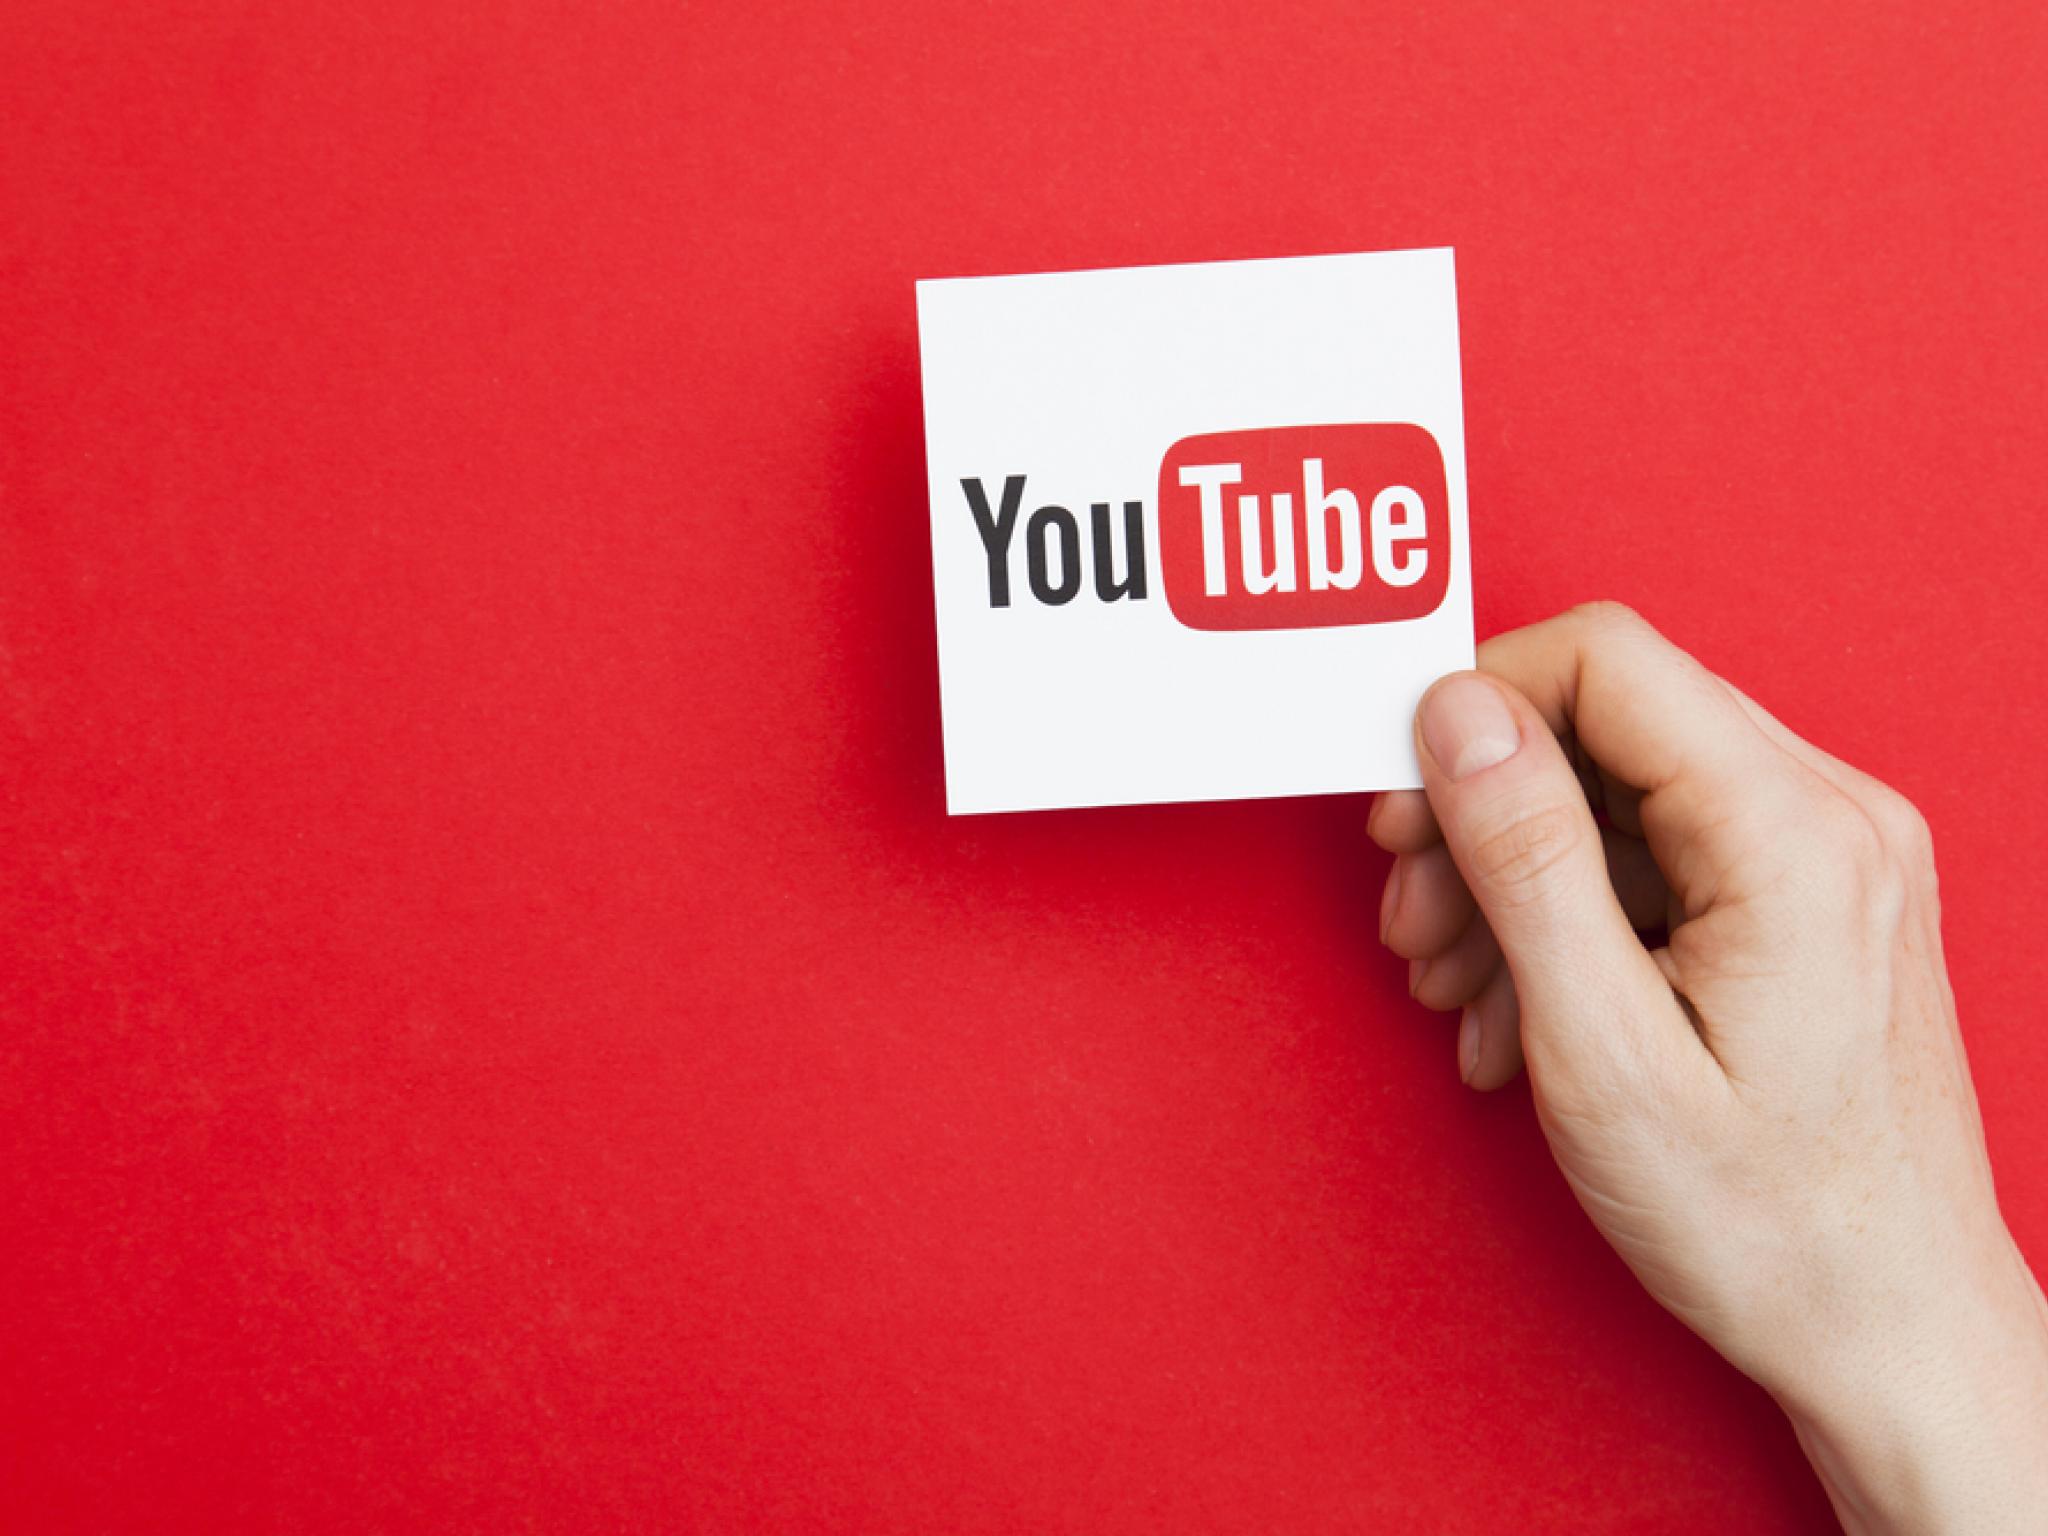  youtube-plans-to-expand-its-reach-beyond-mobile-devices-ceo-neal-mohan-says-were-not-a-social-media-platform-were-really-sort-of-our-own-thing 